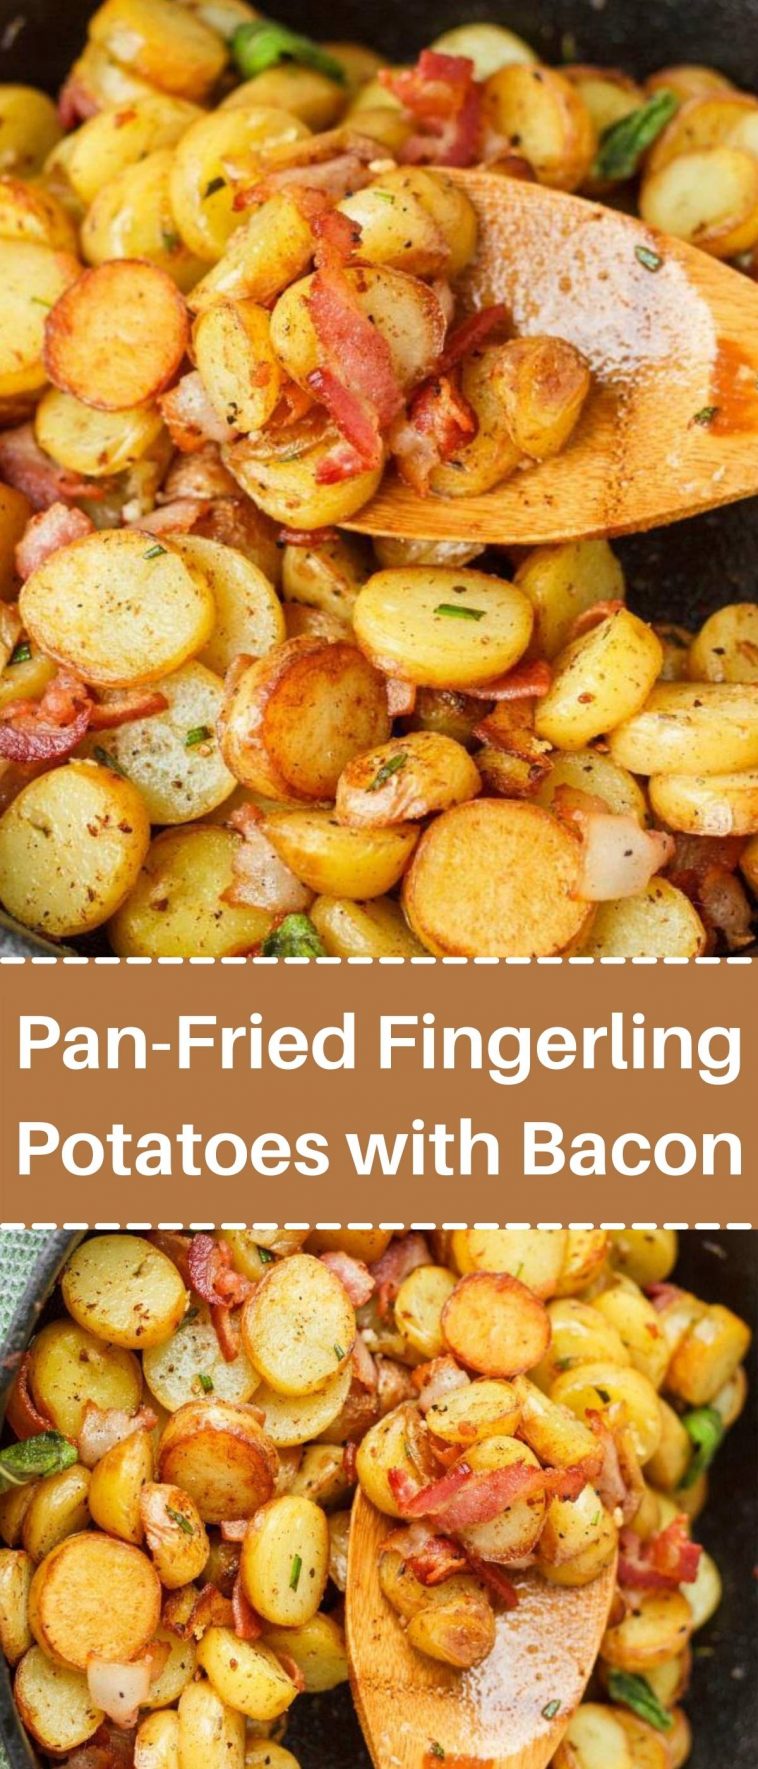 Pan-Fried Fingerling Potatoes with Bacon